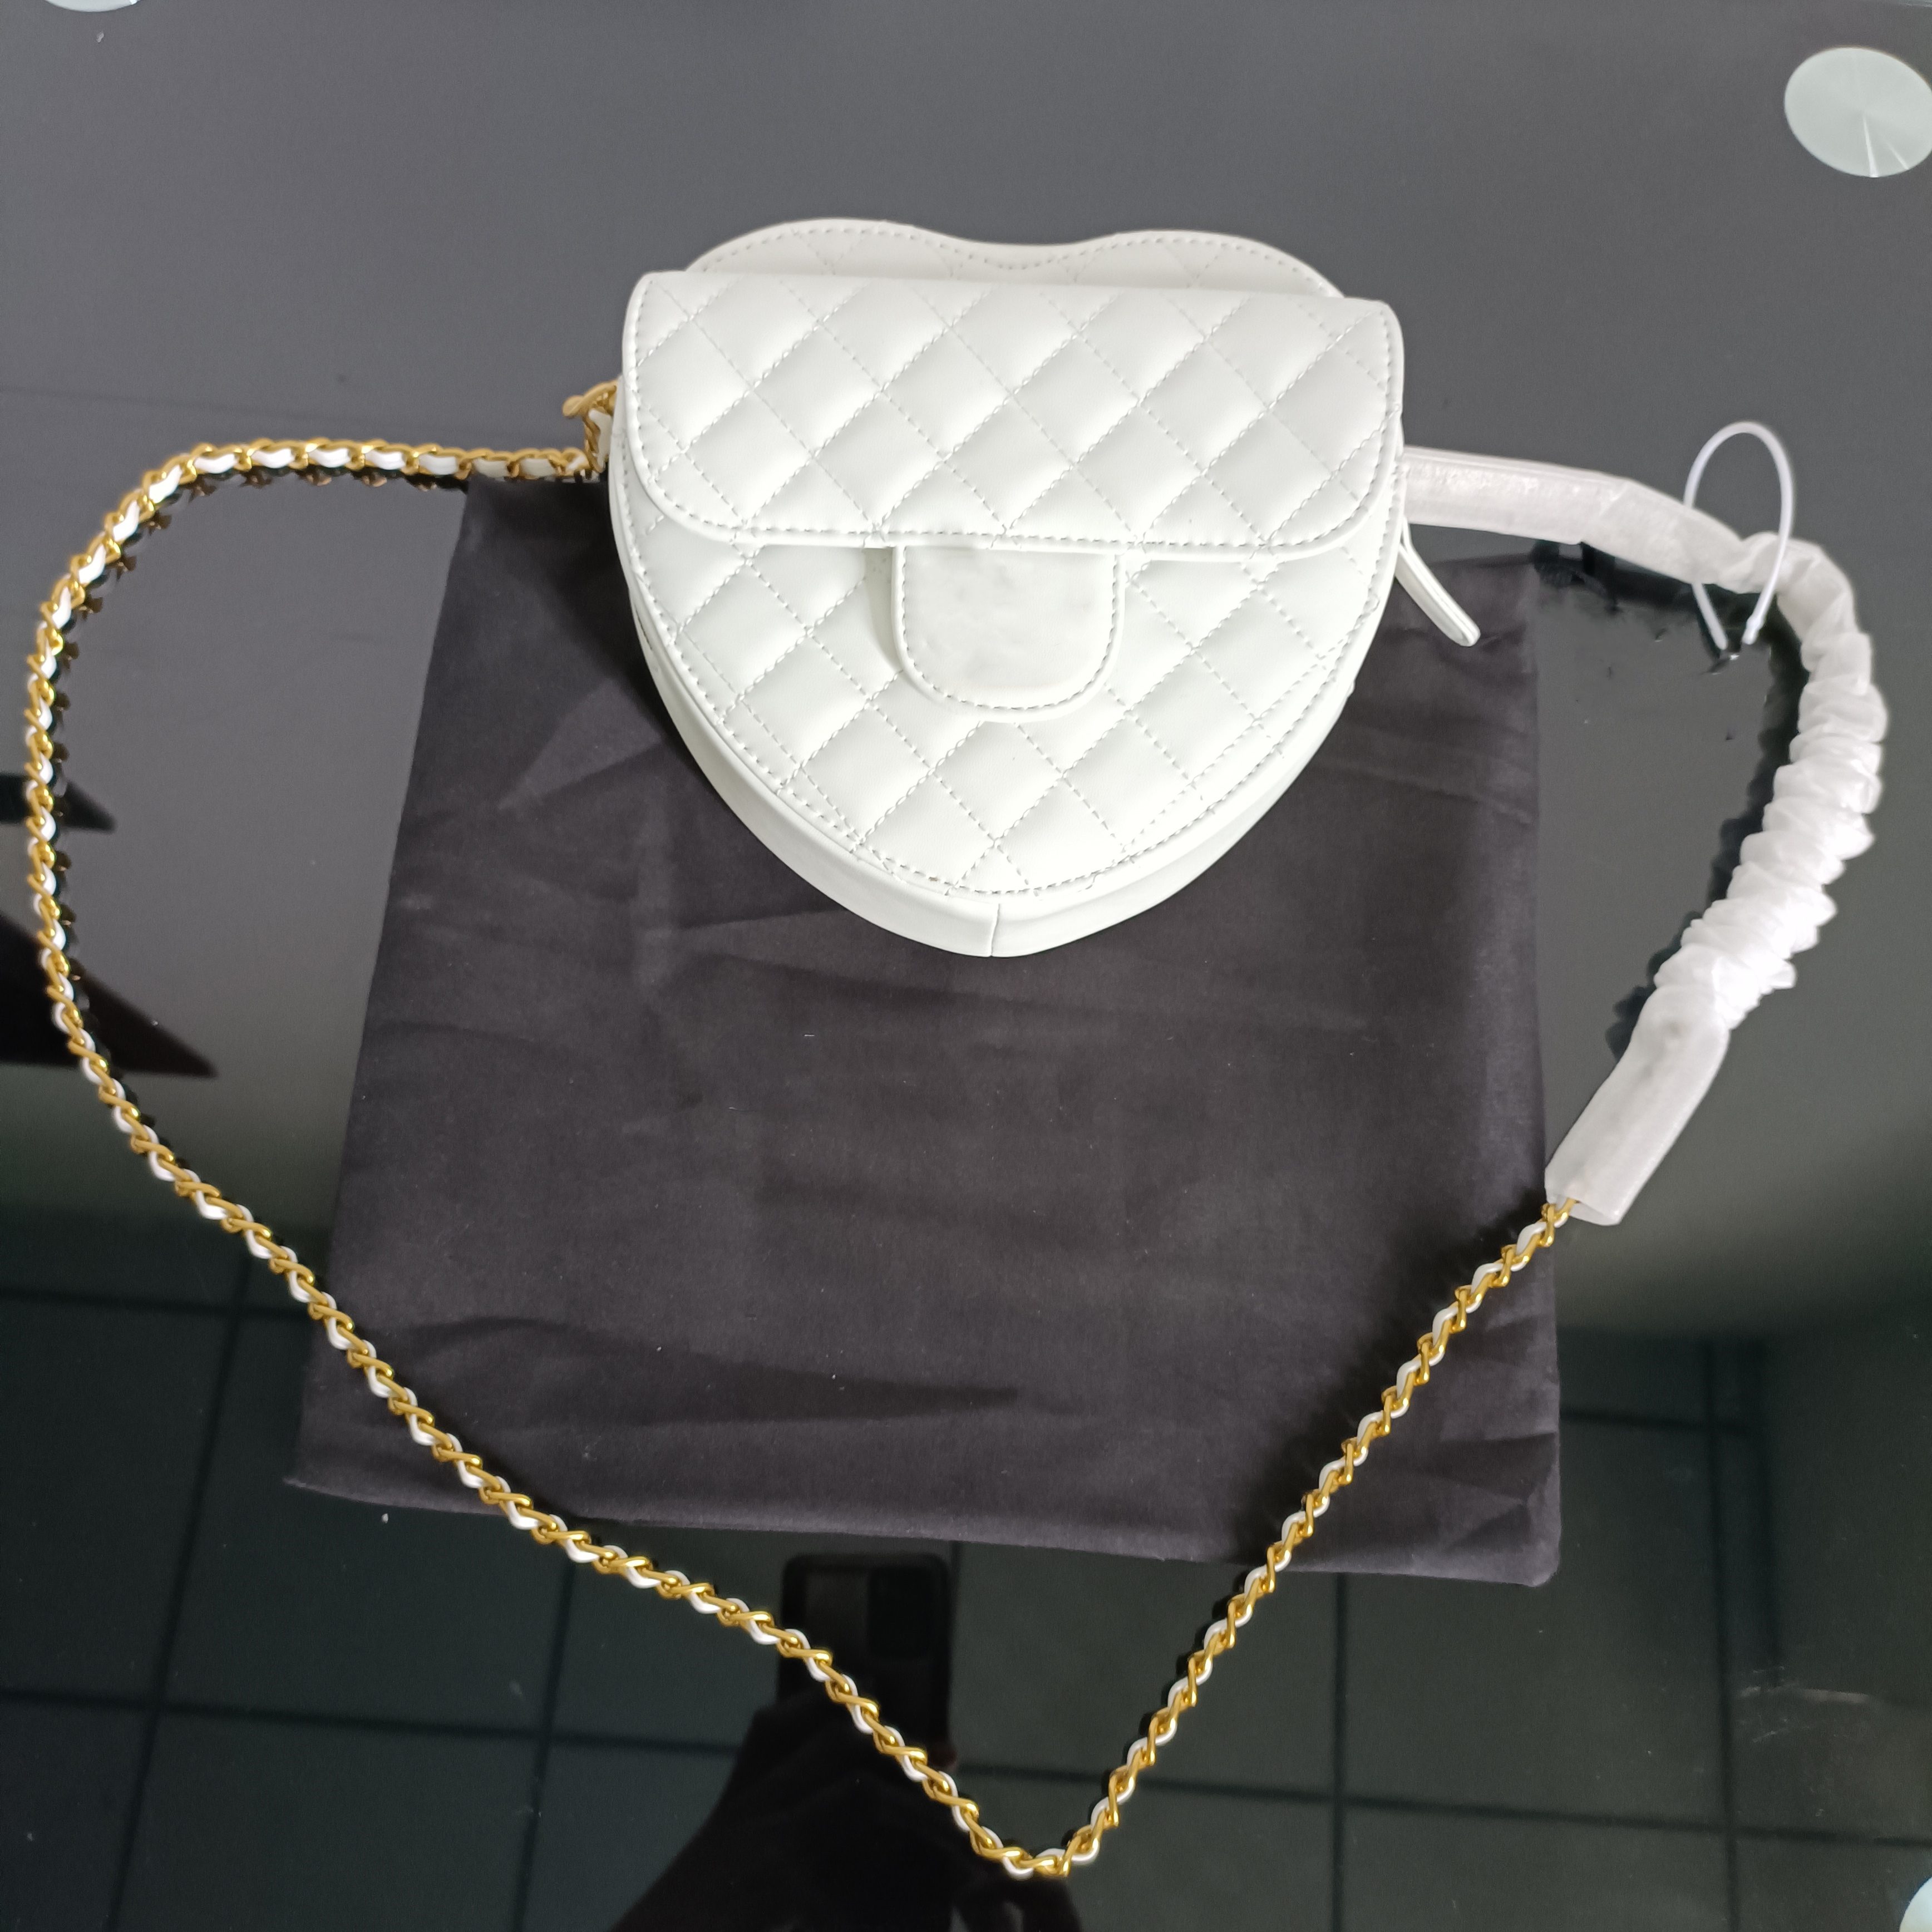 

2022 Classic Mini Heart Style Quilted Vanity Bags GHW Chain Crossbody Shoulder Purse Cosmetic Case Outdoor Sacoche Pink White Black Designer Handbags Sacoche L73, Extra freight